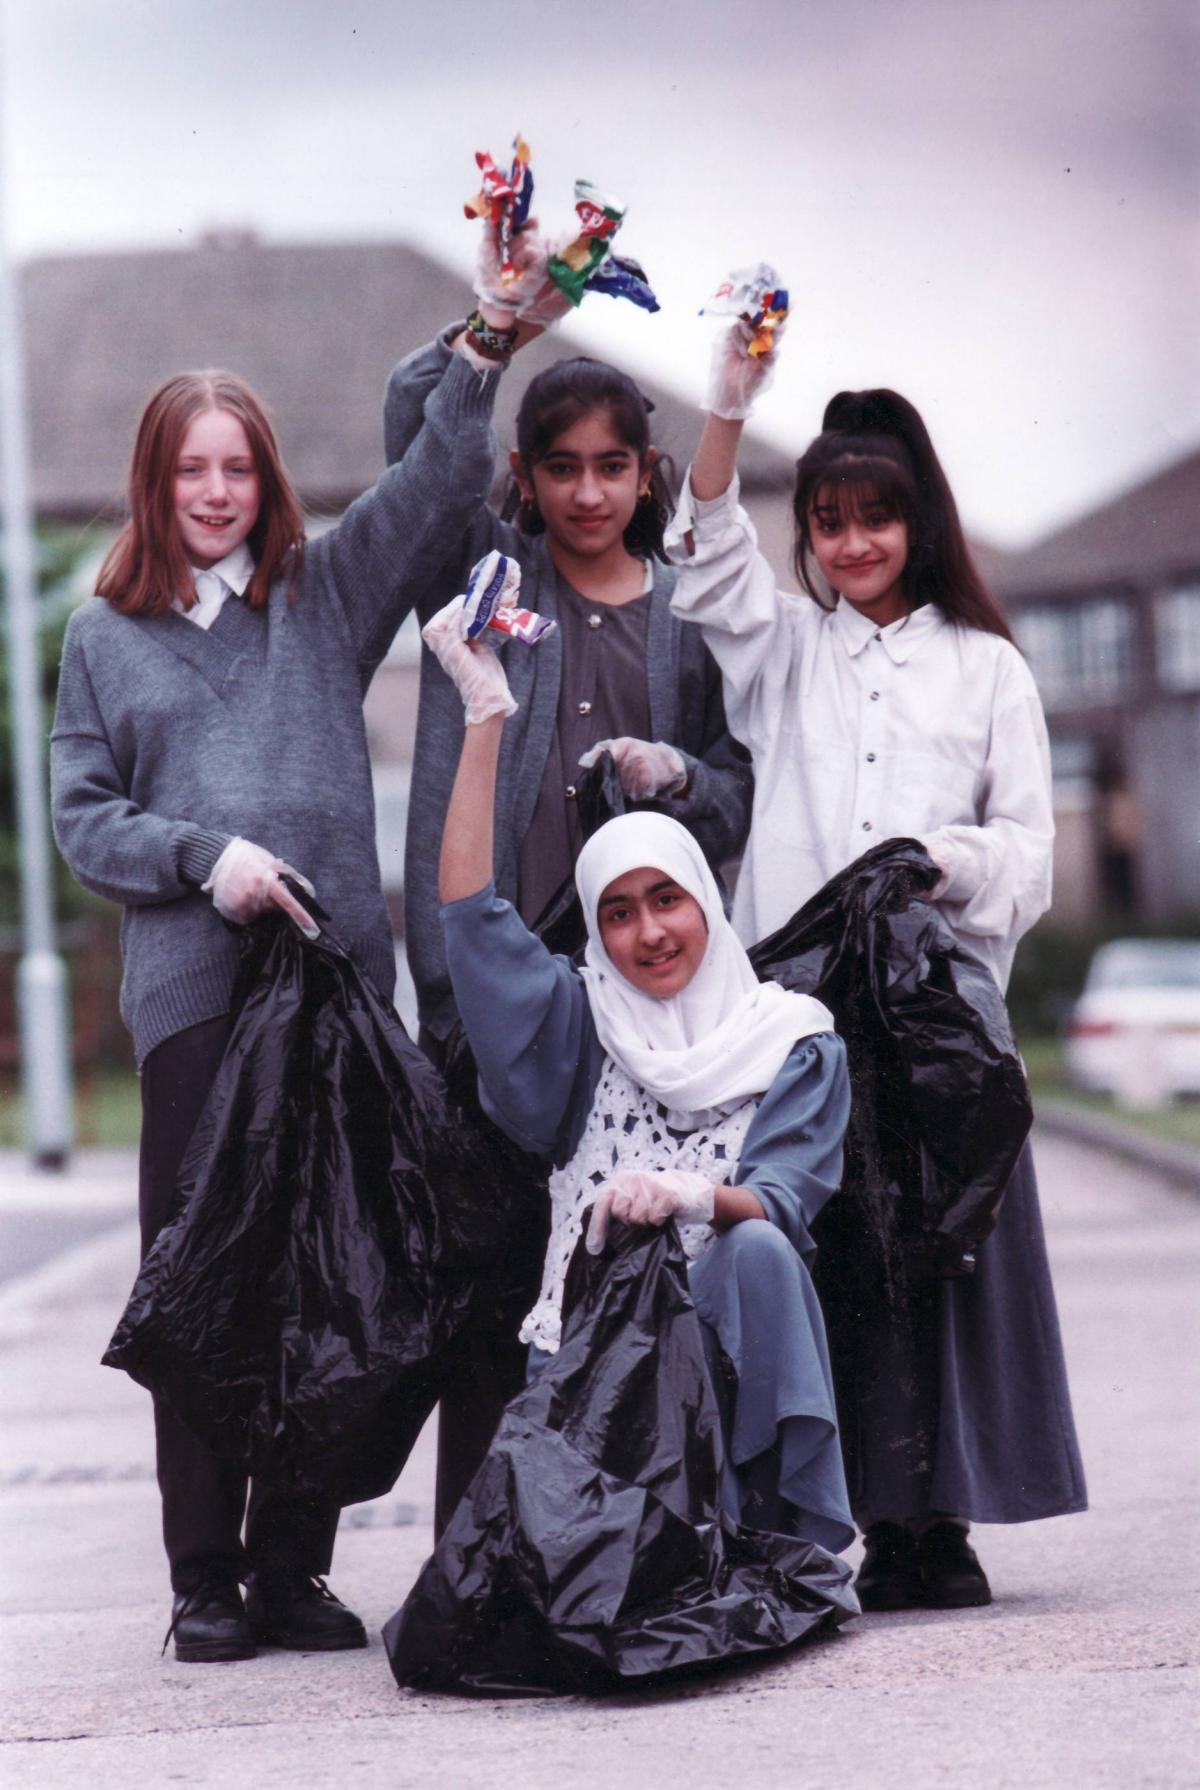 A clean-up event in 1995